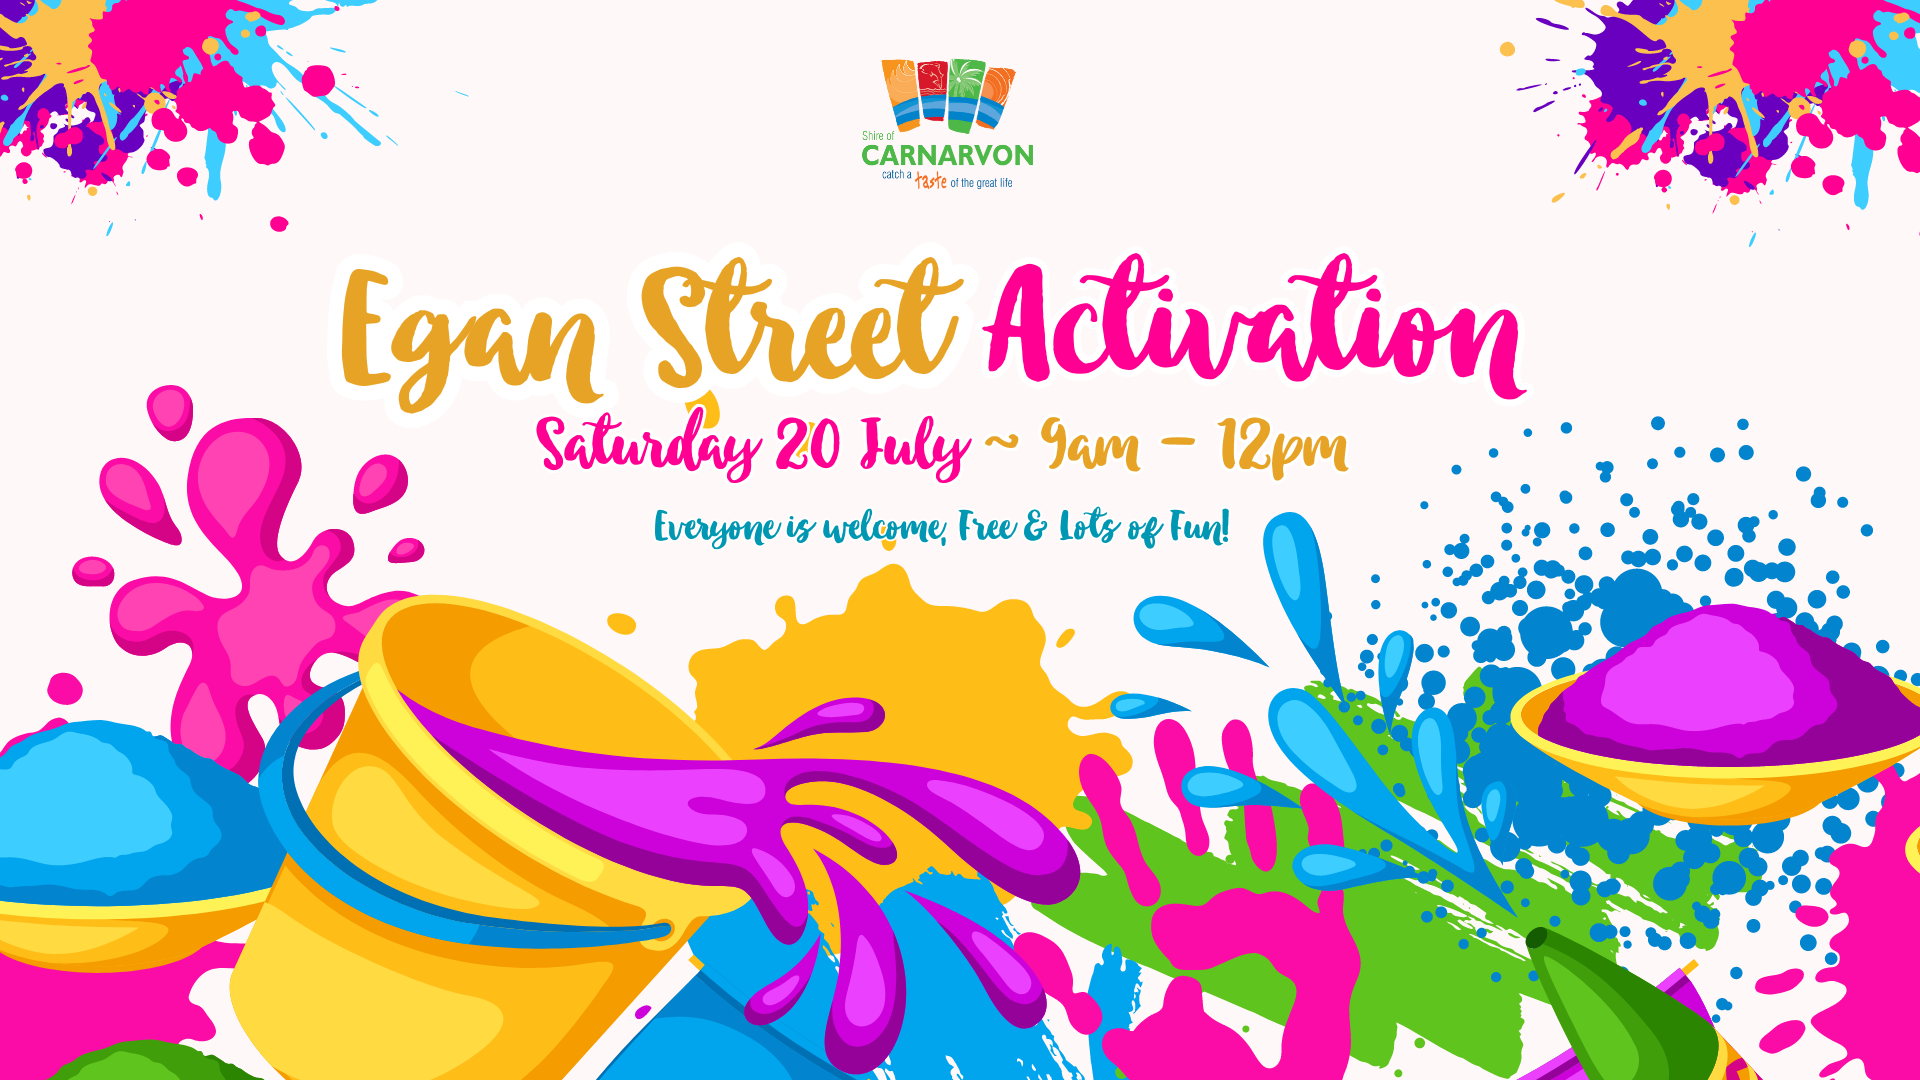 Join the Egan Street Activation!